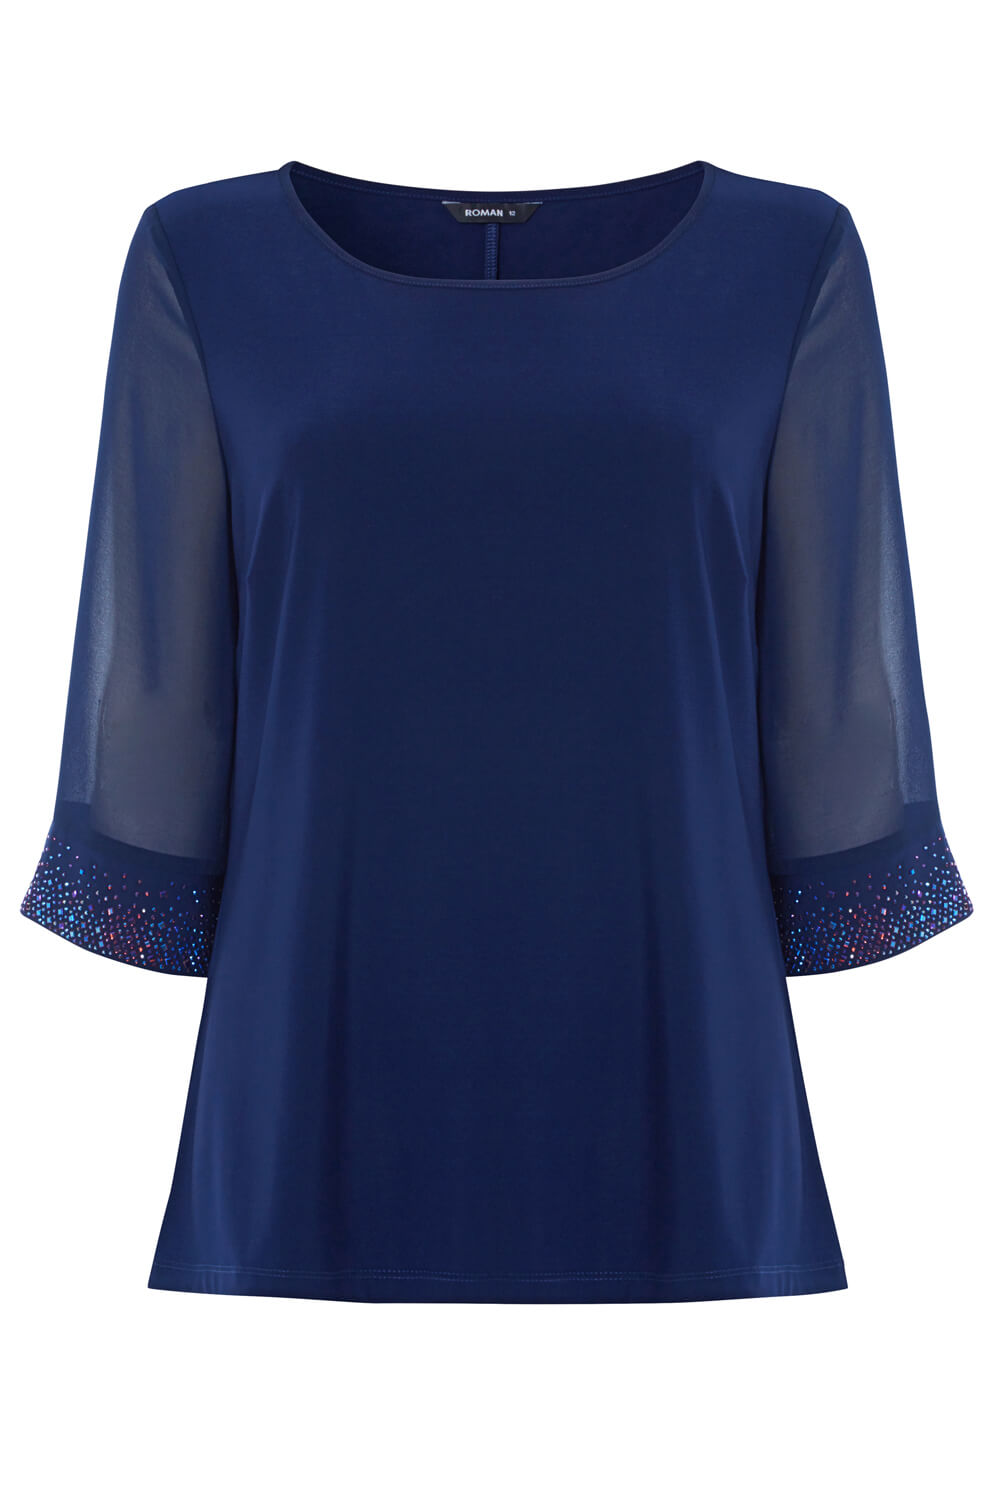 Navy  Sparkle Embellished Cuff Chiffon Top, Image 5 of 5